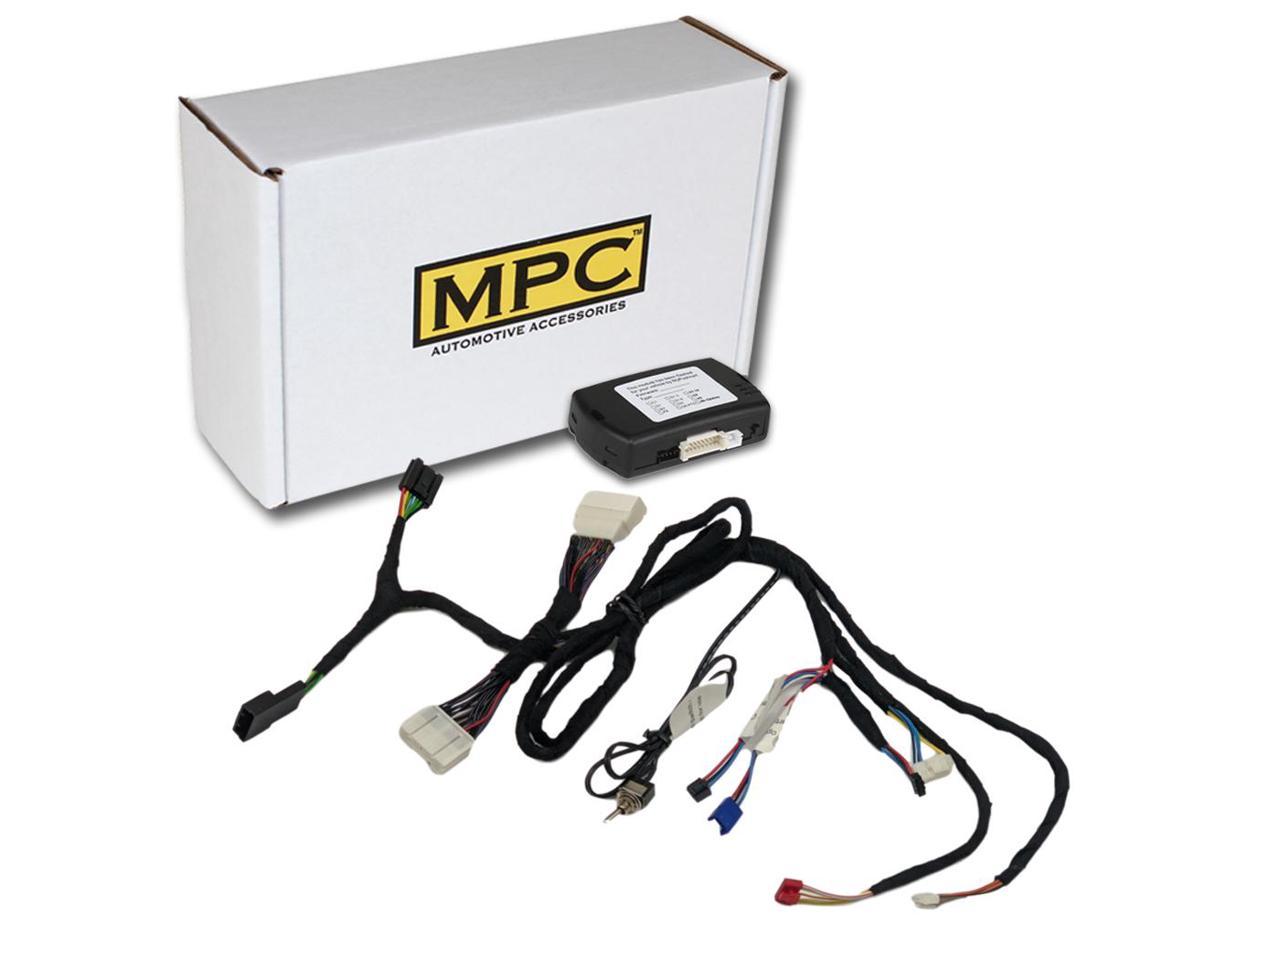 MPC Factory Remote Activated Remote Start Kit for 2008-2012 Ford Escape Key-to-Start Firmware Preloaded Prewired Gas 